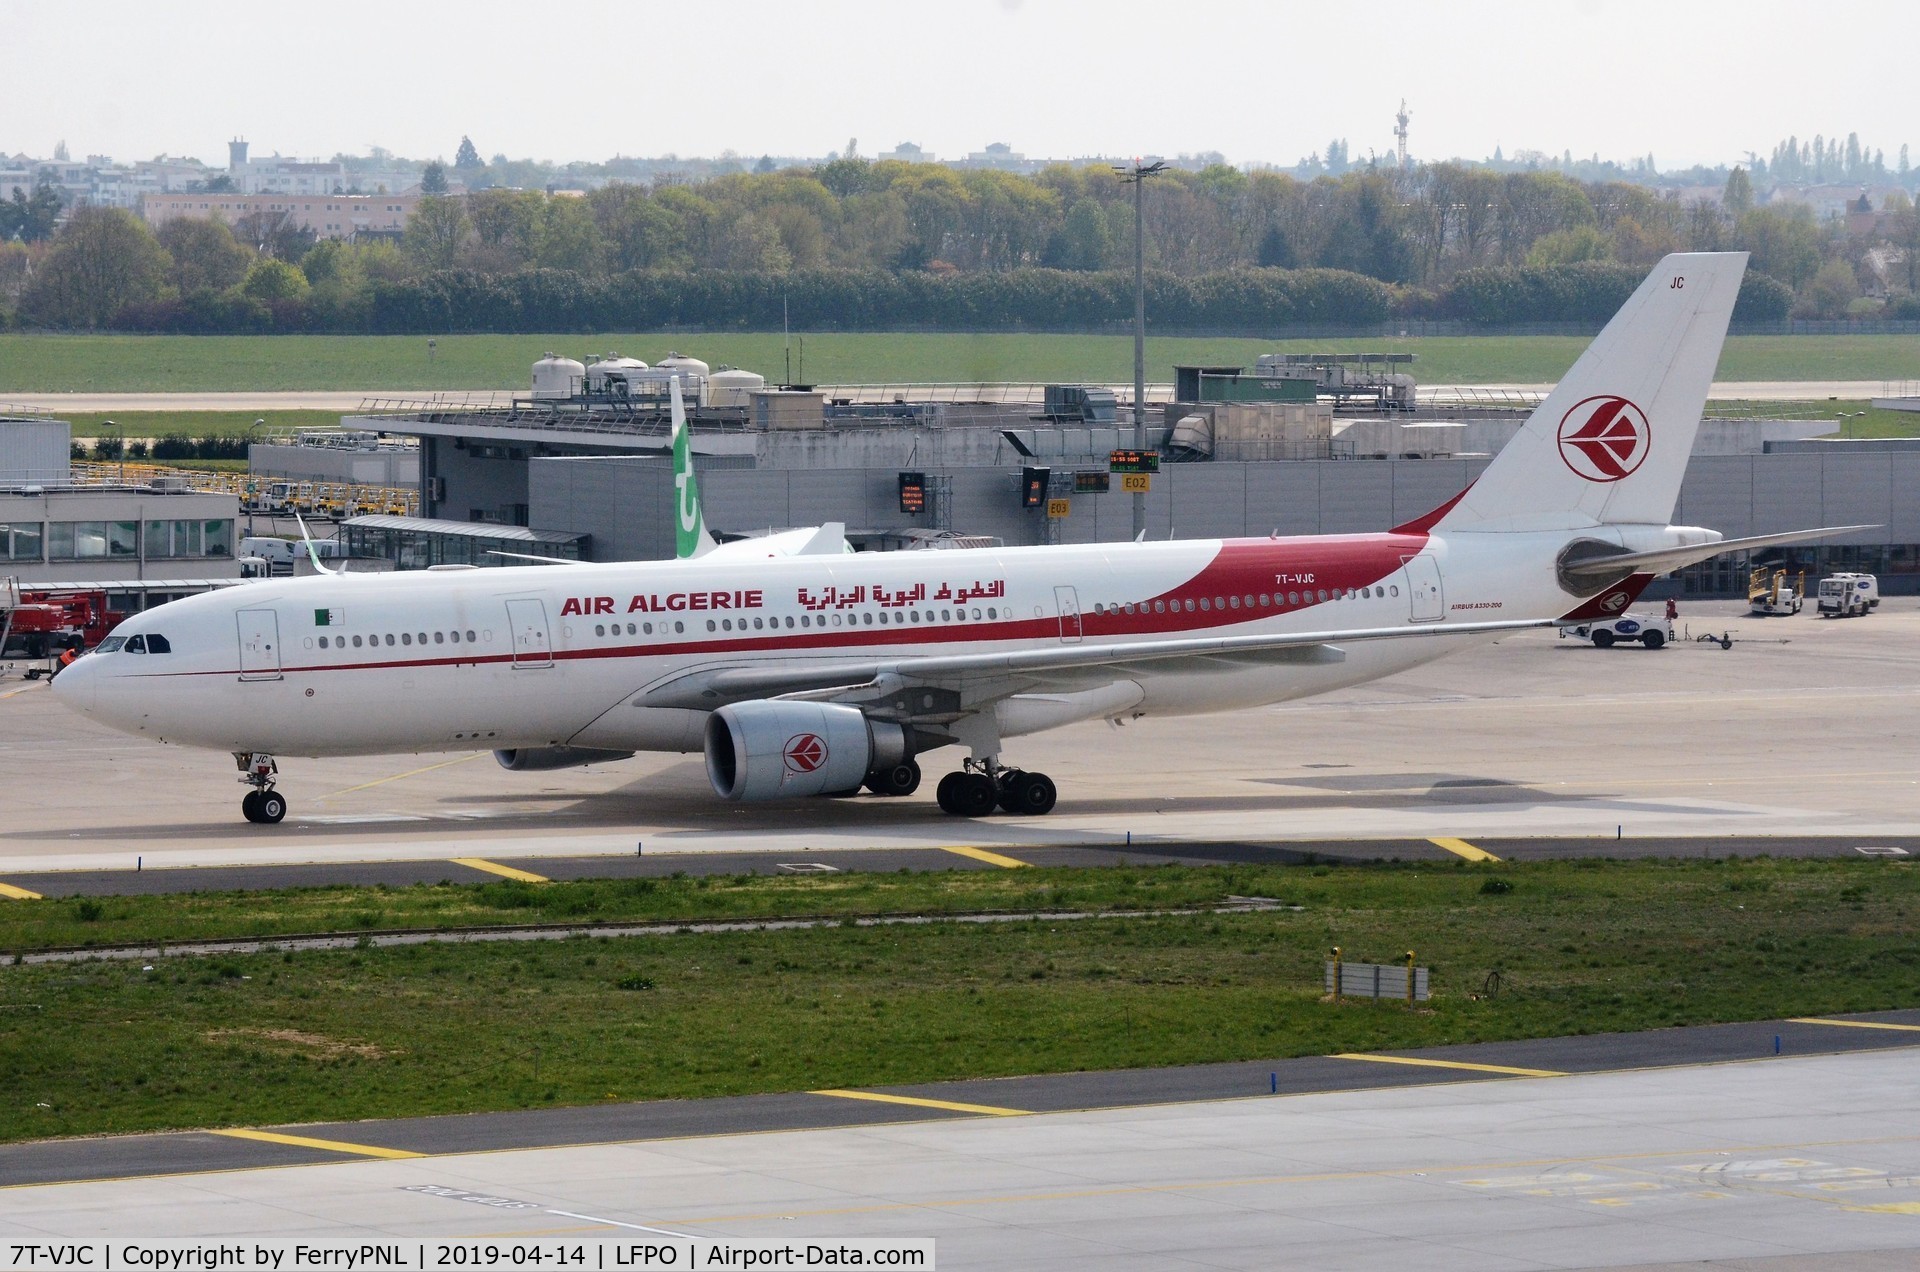 7T-VJC, 2015 Airbus A330-202 C/N 1649, Air Algerie A332 arriving in Orly.